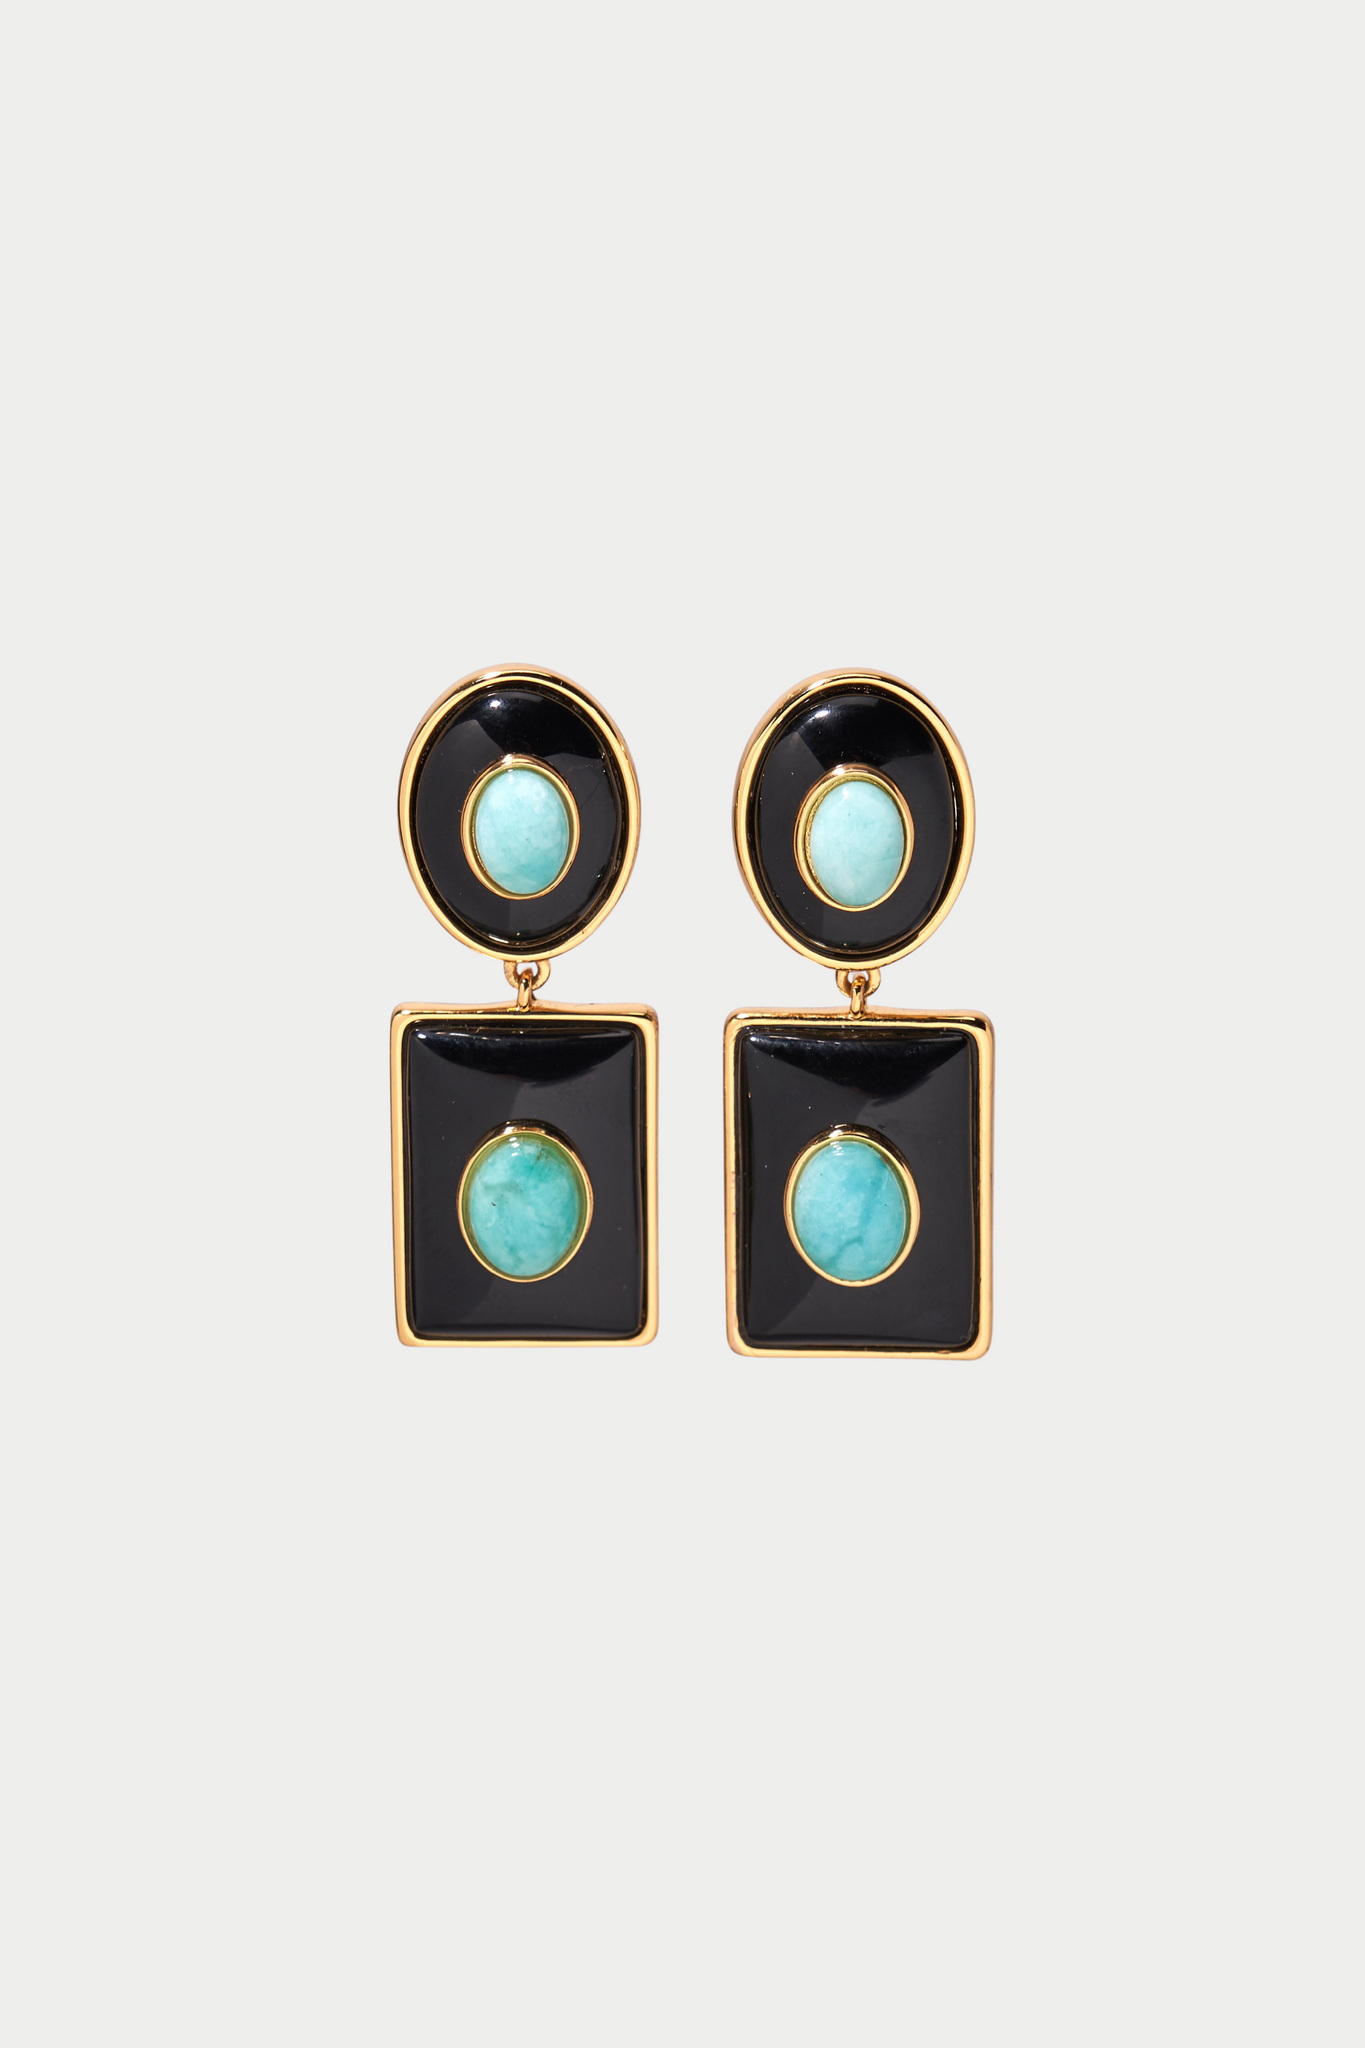 Lizzie Fortunato Jewels - Ethereal Pool Earrings, Midnight